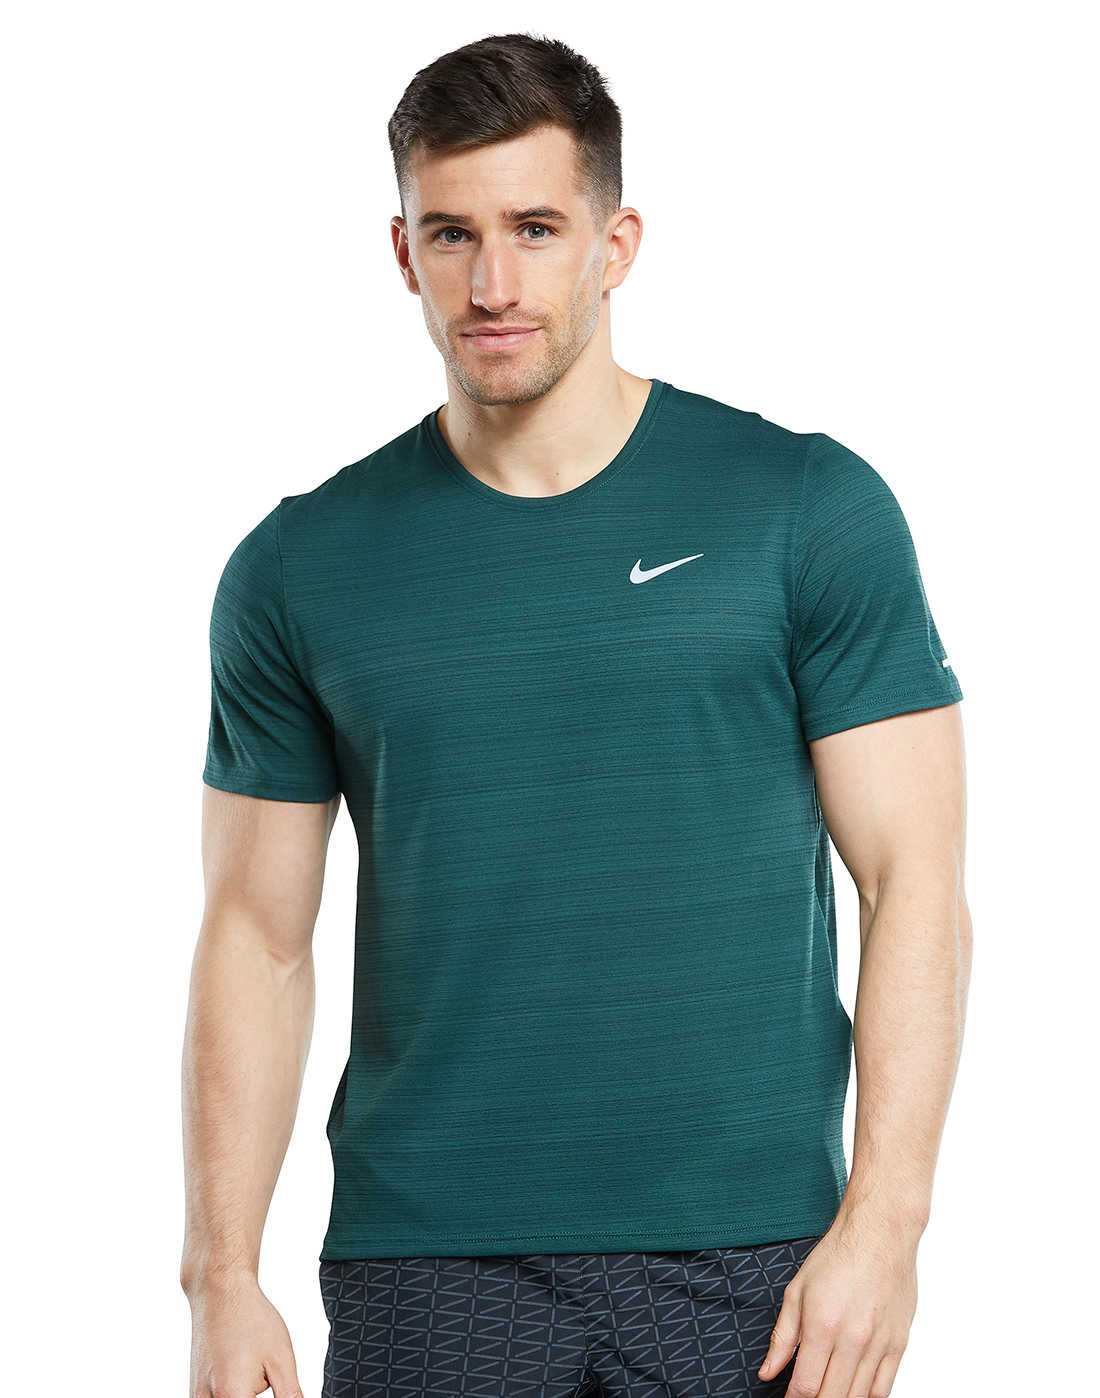 Nike Mens Dry Fit Miler T-shirt - Green | Life Style Sports IE